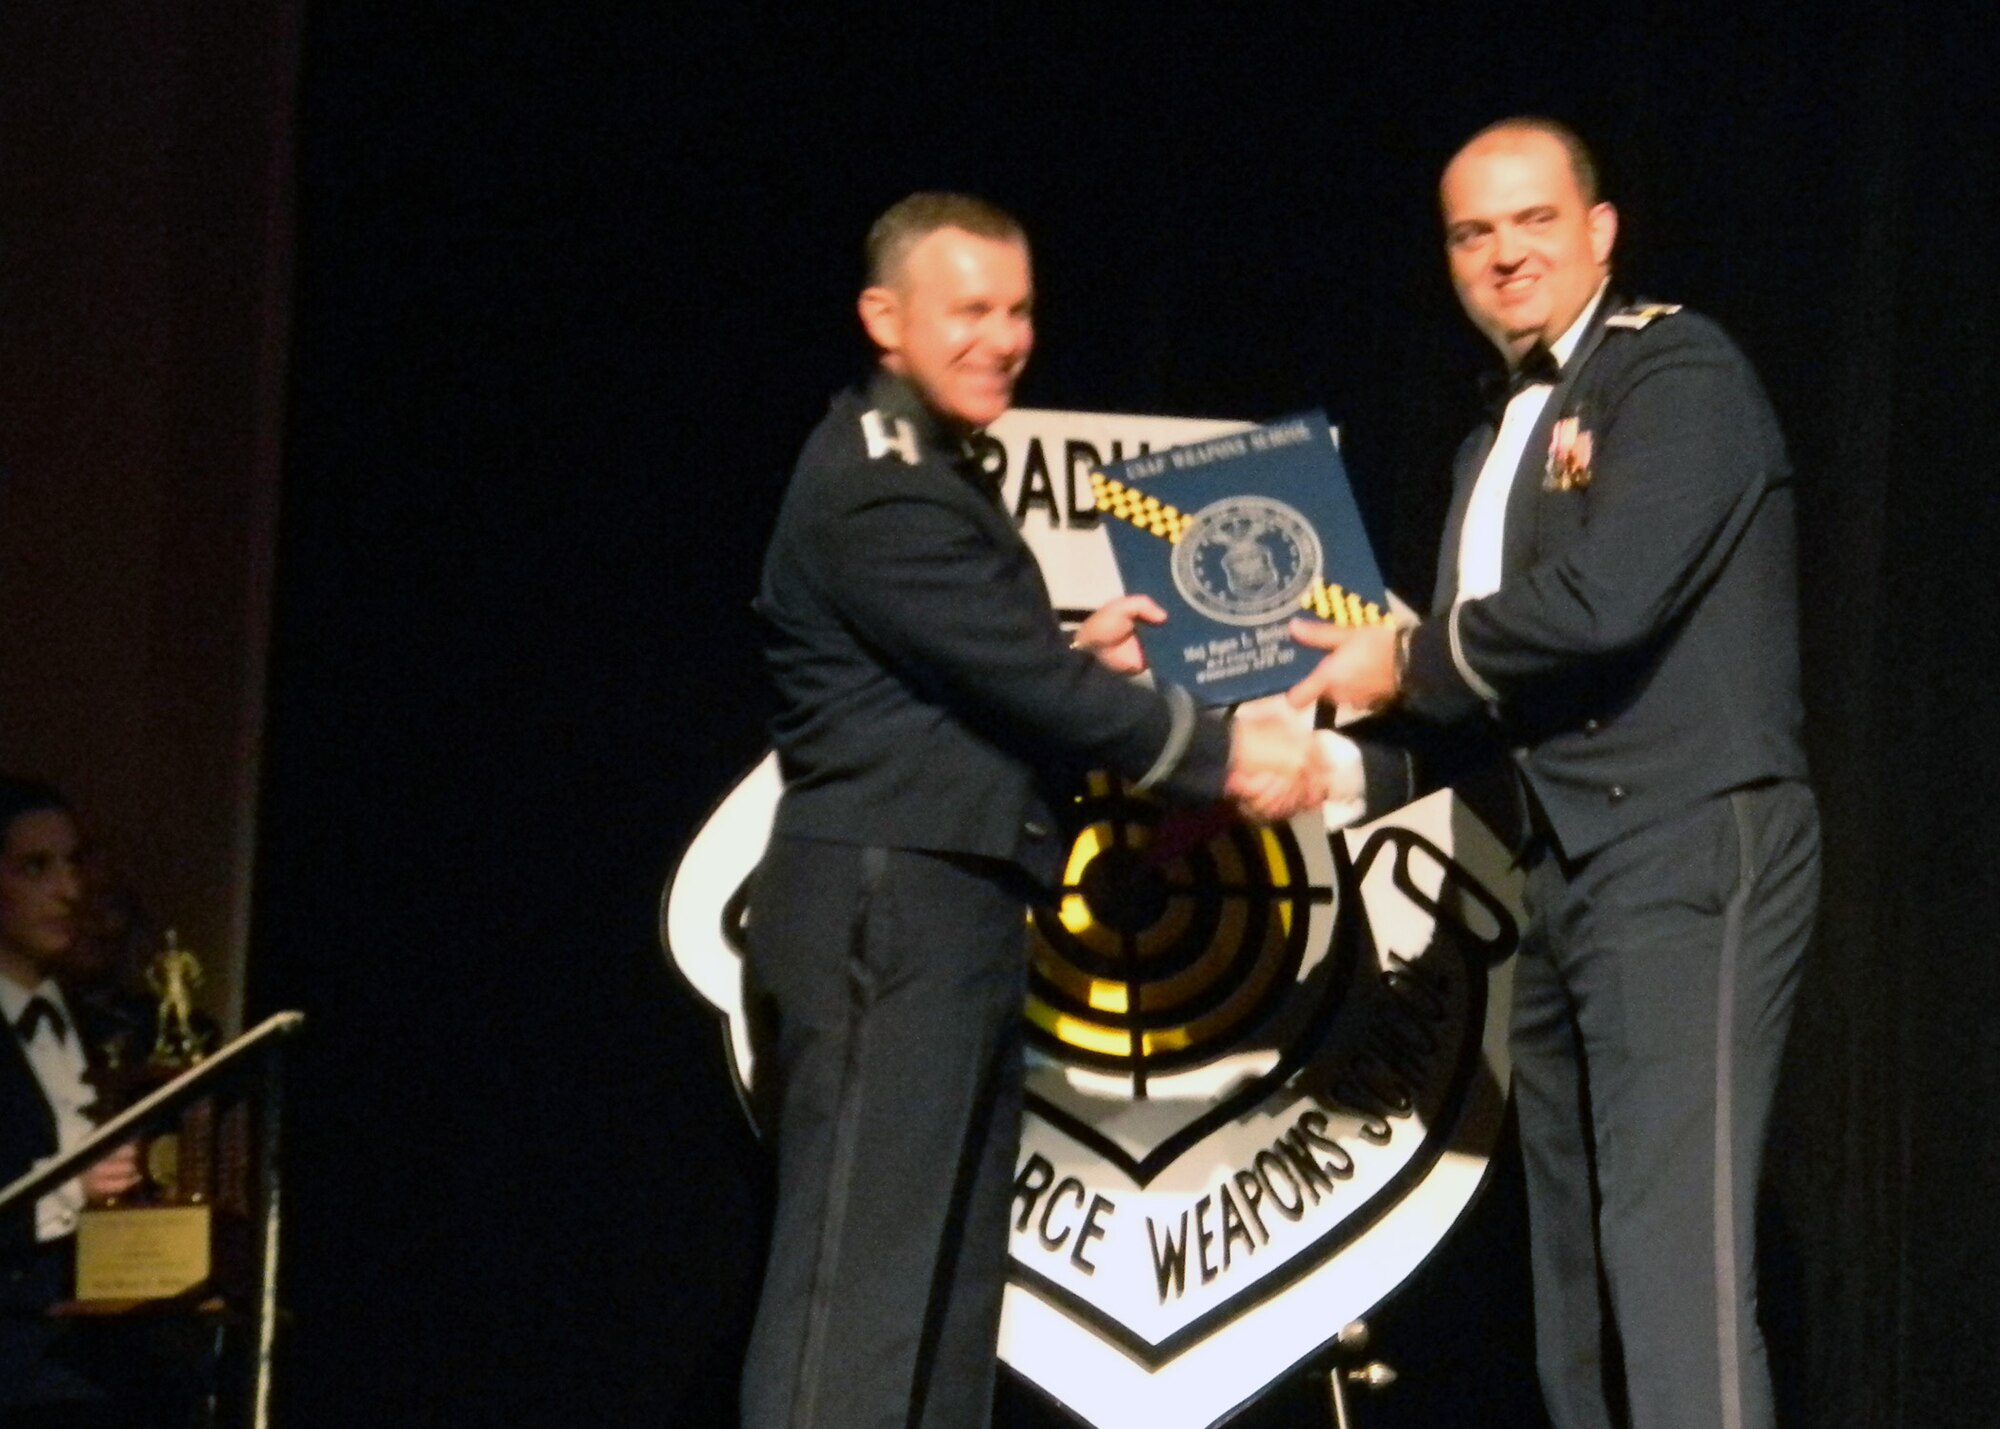 B-2 bomber pilot Maj Ryan "Poacher" Bailey, 131st Bomb Wing, Missouri Air National Guard, receives his  U.S. Air Force Weapons School graduation plaque on stage at the Flamingo Hotel and Casino, Dec 10.   He received the additional honor of being awarded Outstanding Graduate of his class.  (Air National Guard Courtesy Photo)

